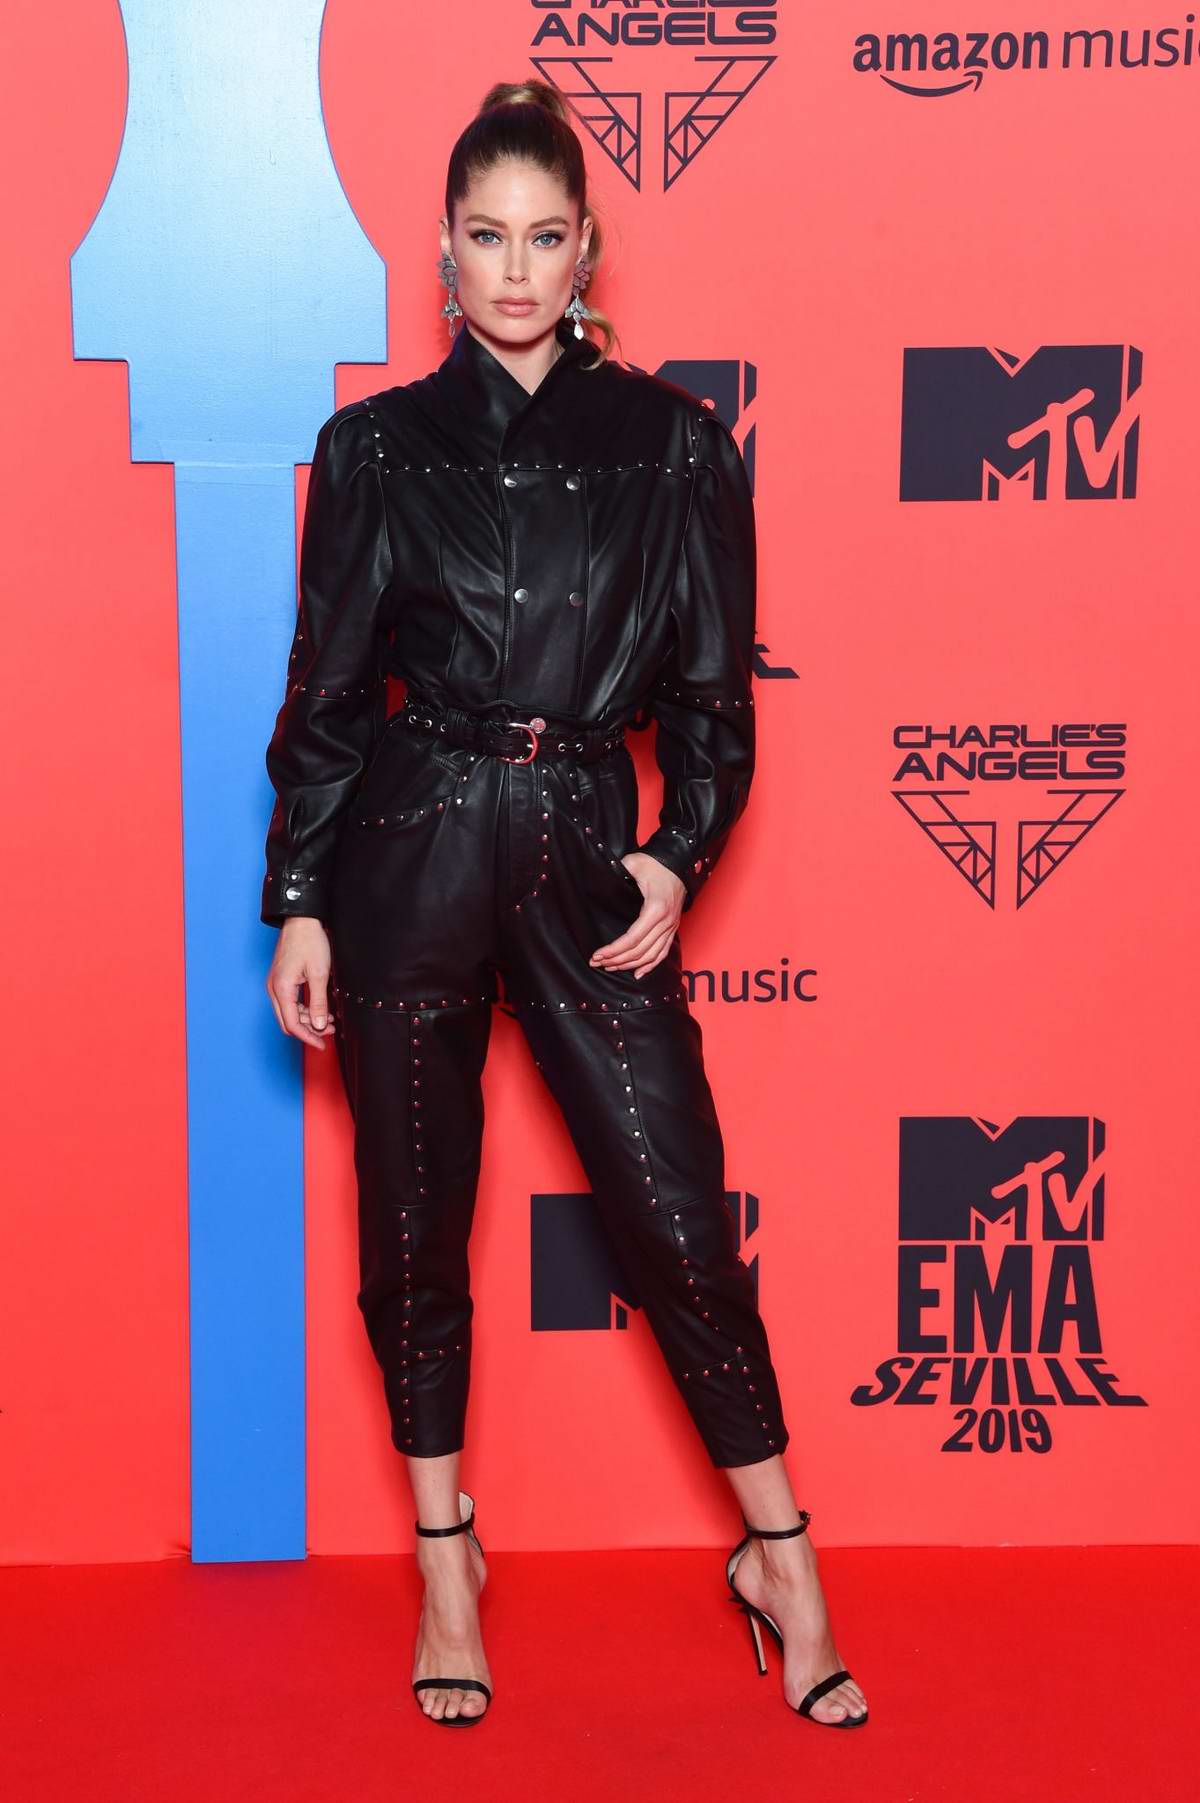 Doutzen Kroes attends the MTV European Music Awards 2019 at FIBES Conference and Exhibition Centre in Seville, Spain